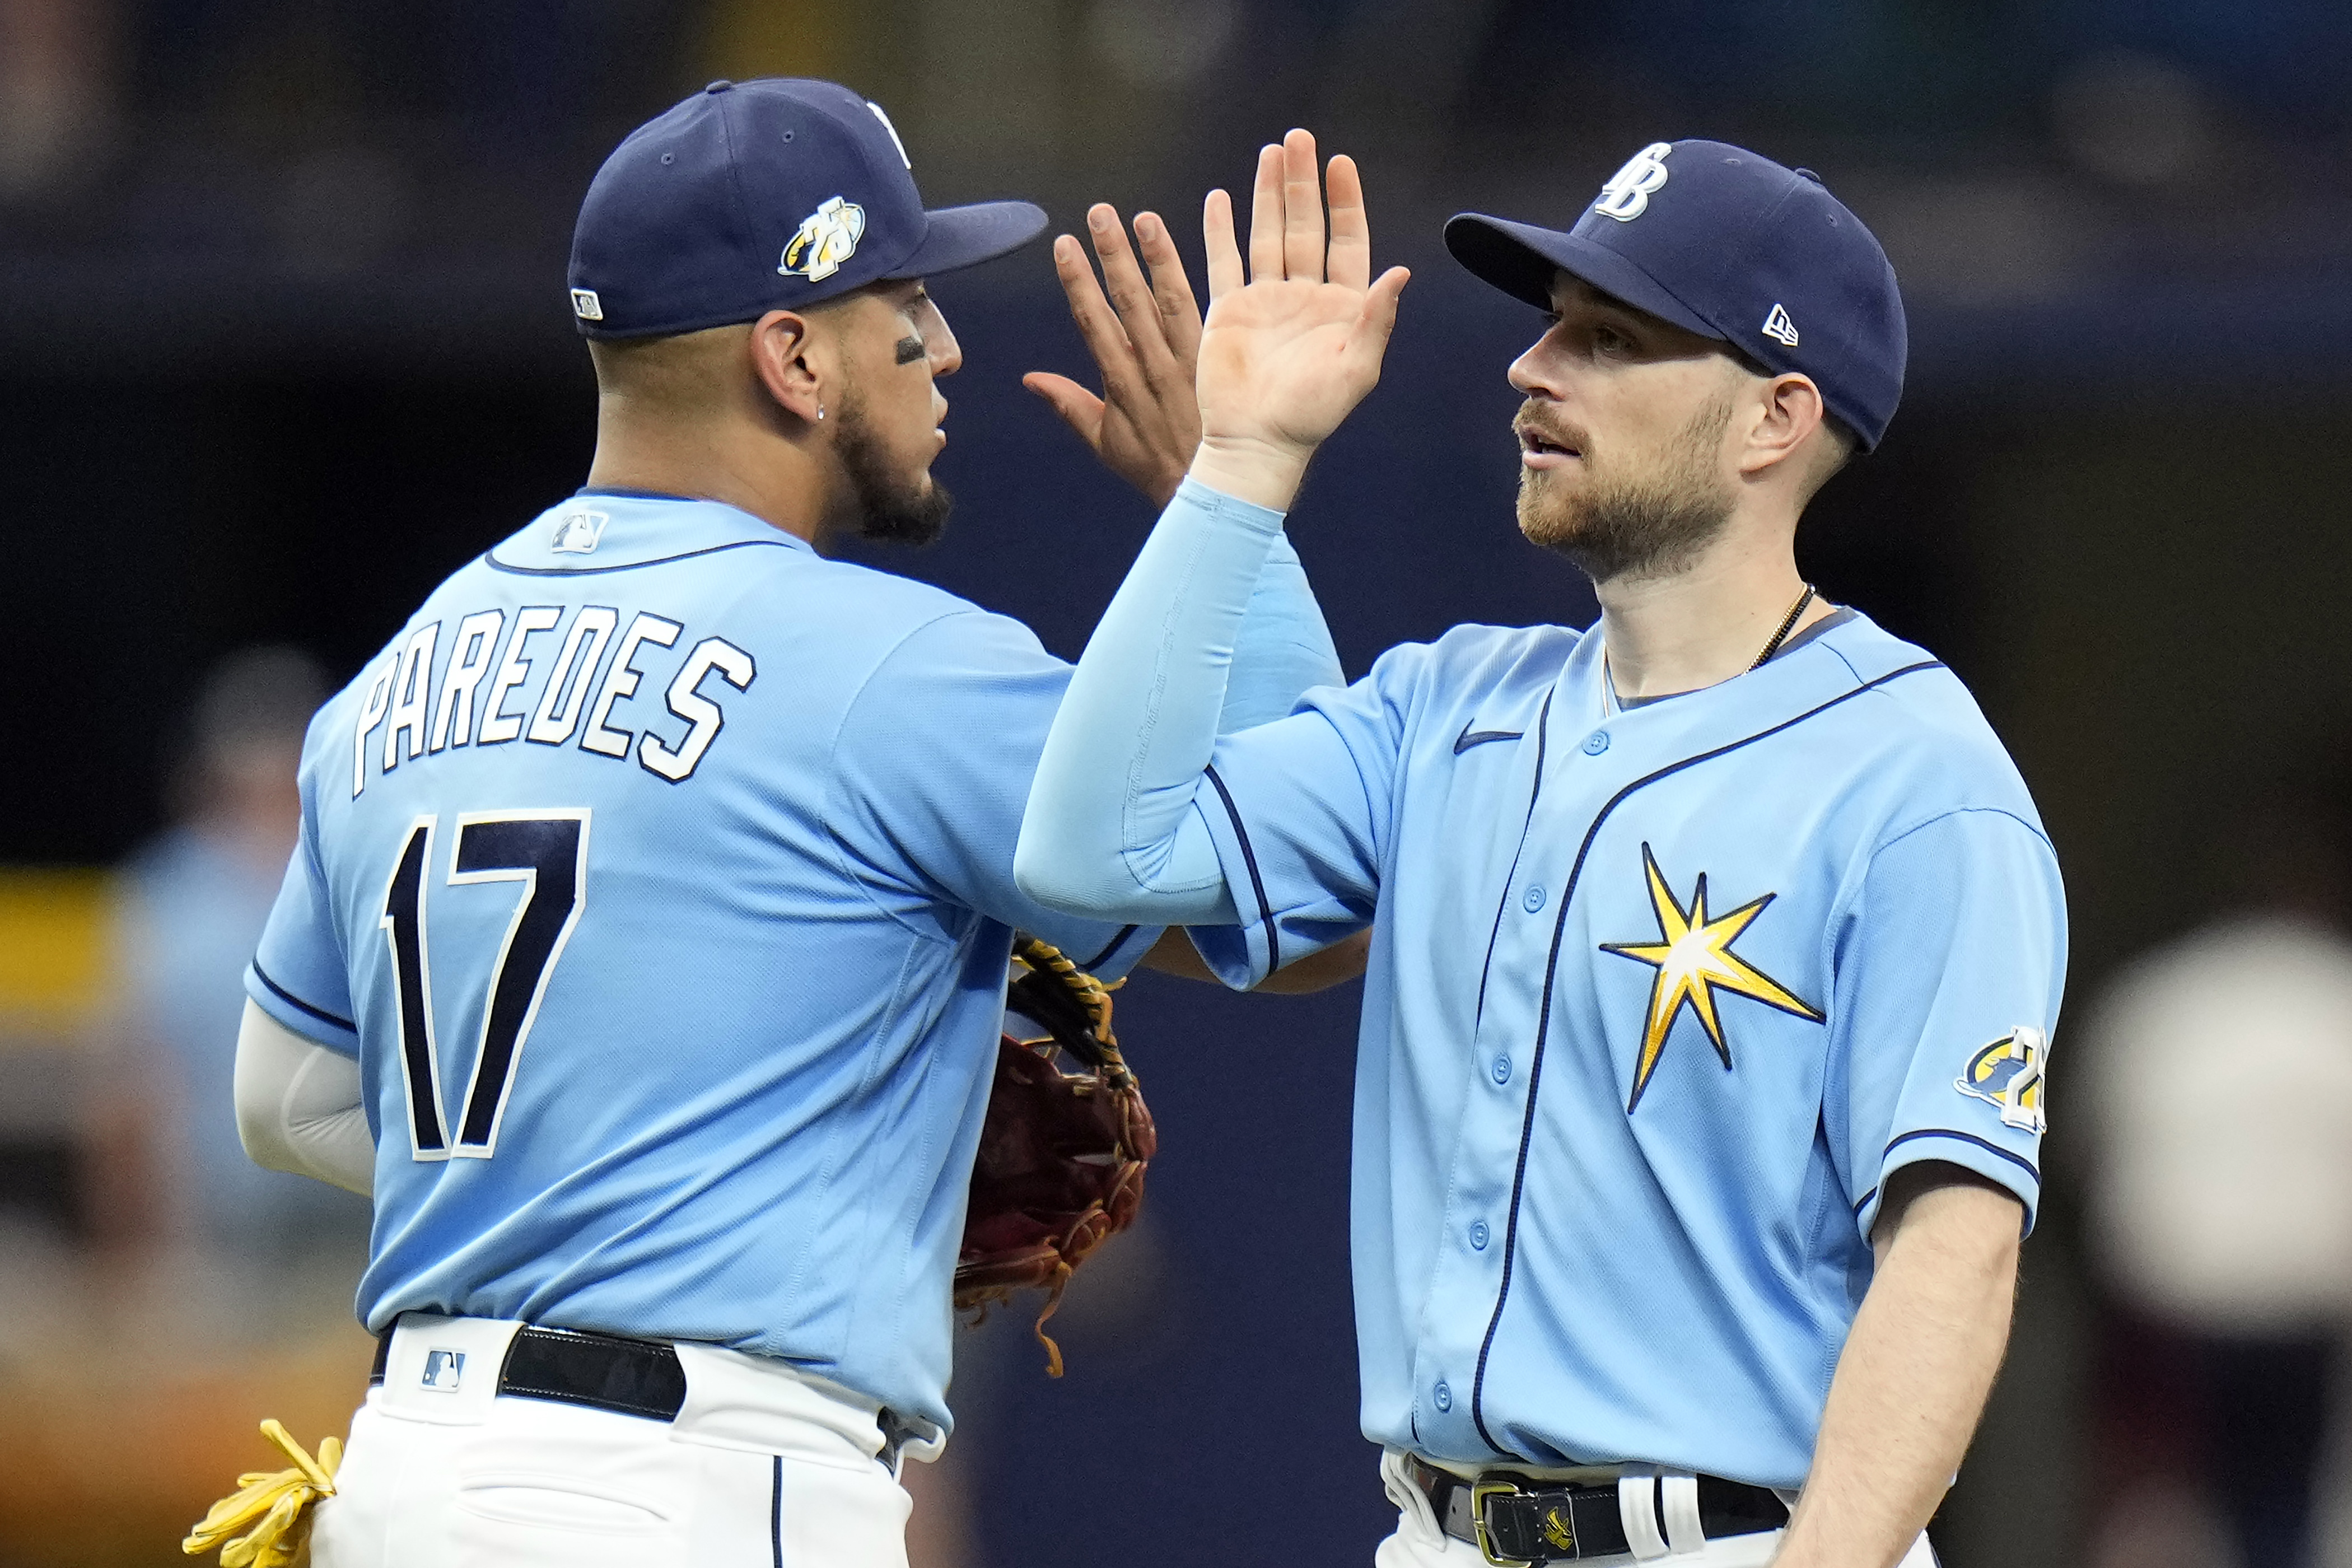 Kevin Kiermaier on Rays' 1-0 win over Royals in series opener